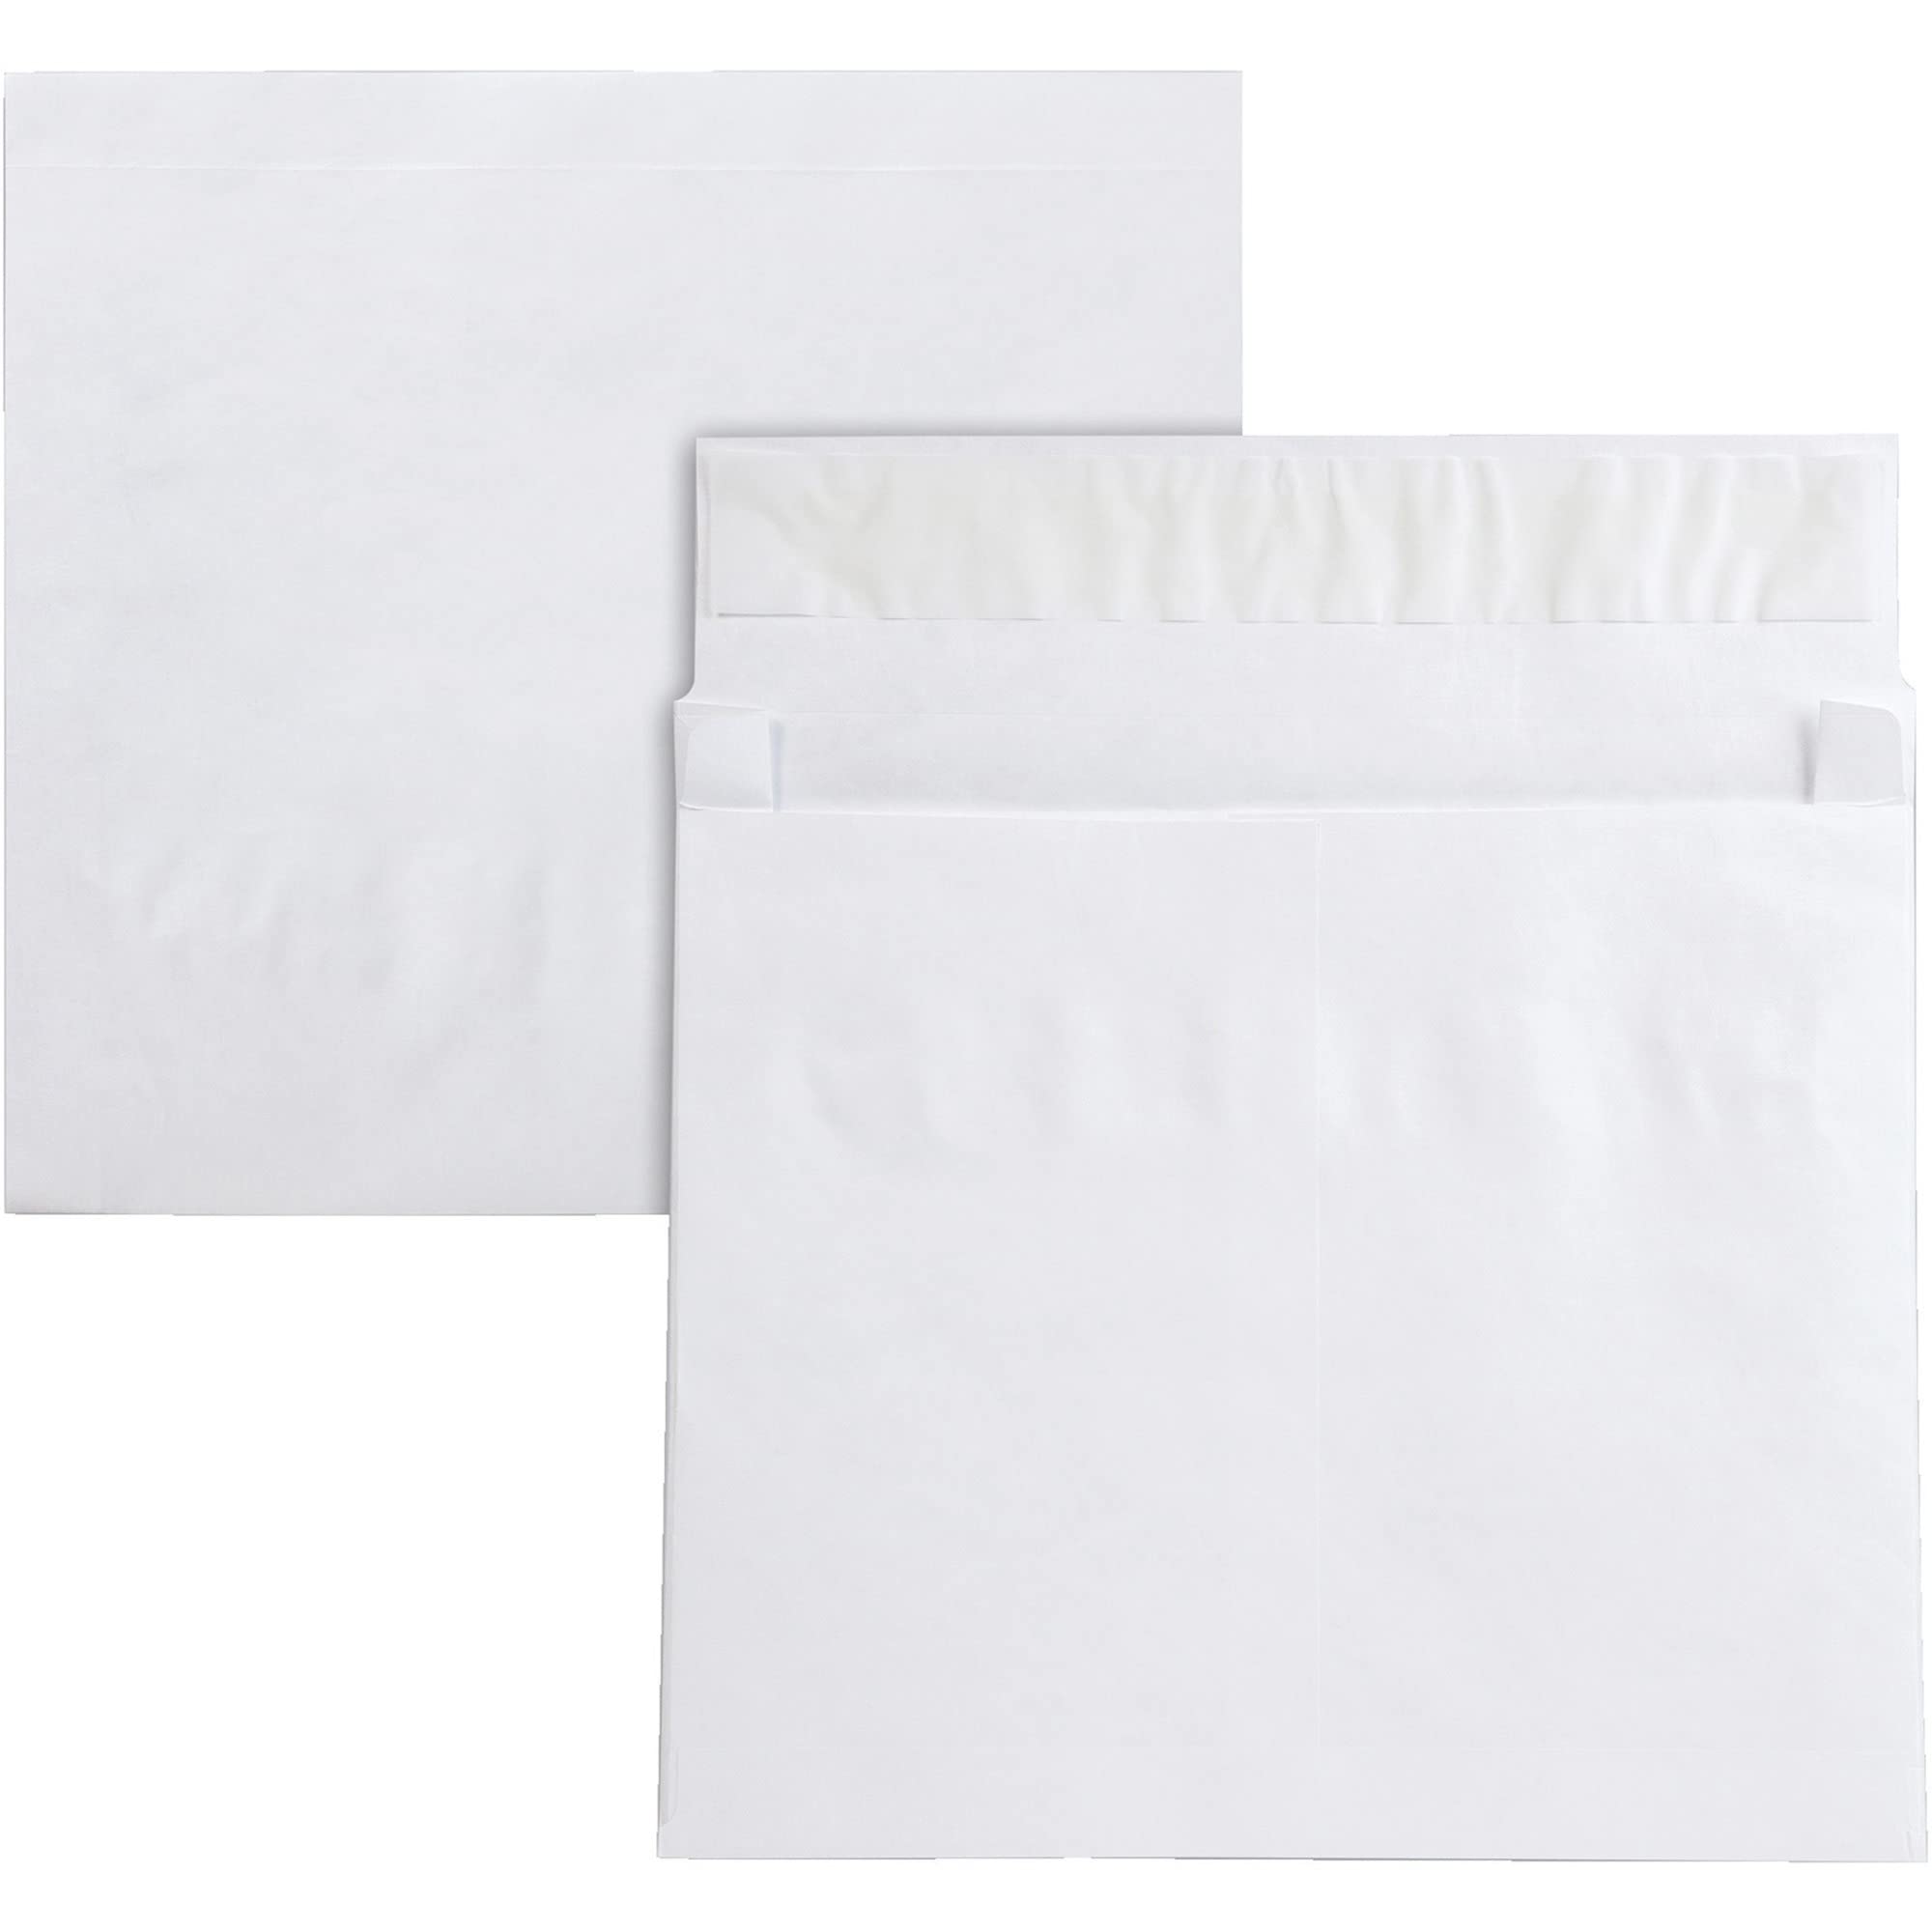 ''QualityPark Tyvek Open Side ENVELOPE, 10 x 13 x 2 Inches (Pack of 25) (R4611)''